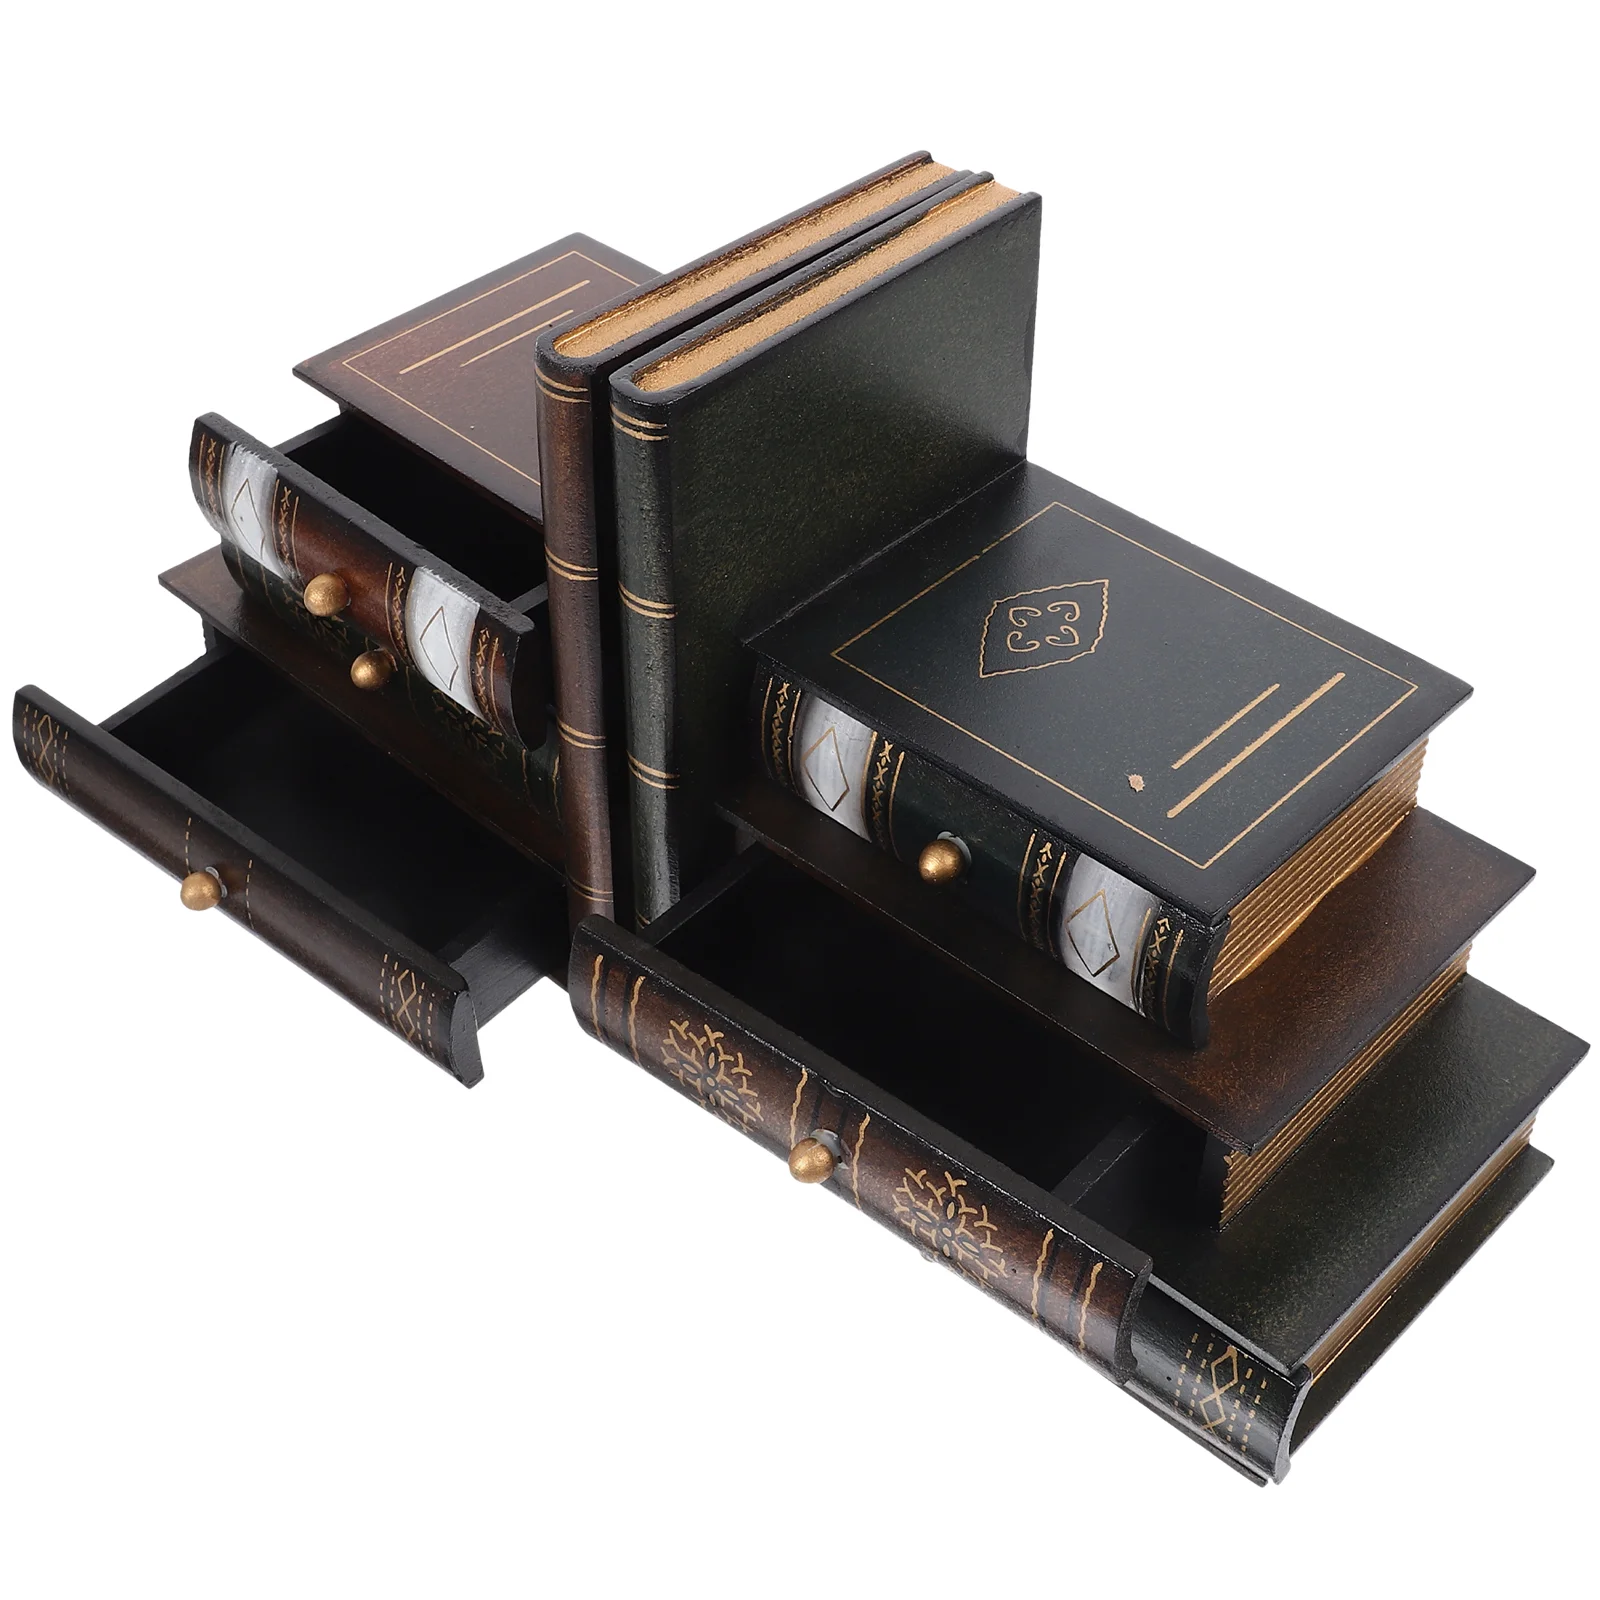 

Book End Storage Box Bookend Shape Container Wood Storage Box for Shelves Book Storage